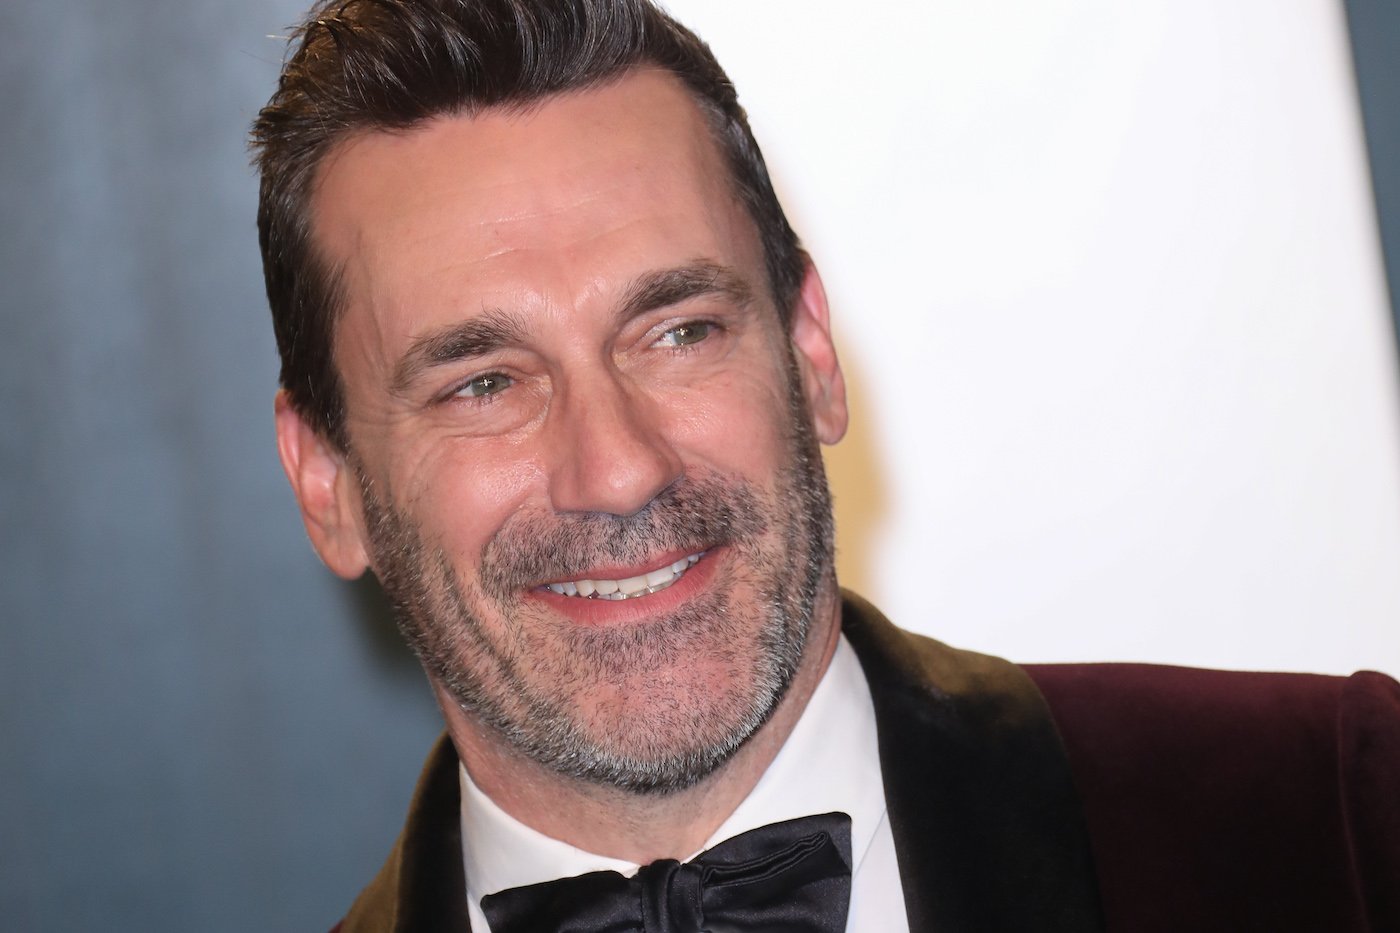 Jon Hamm attends the 2020 Vanity Fair Oscar Party on February 9, 2020, in Beverly Hills, California